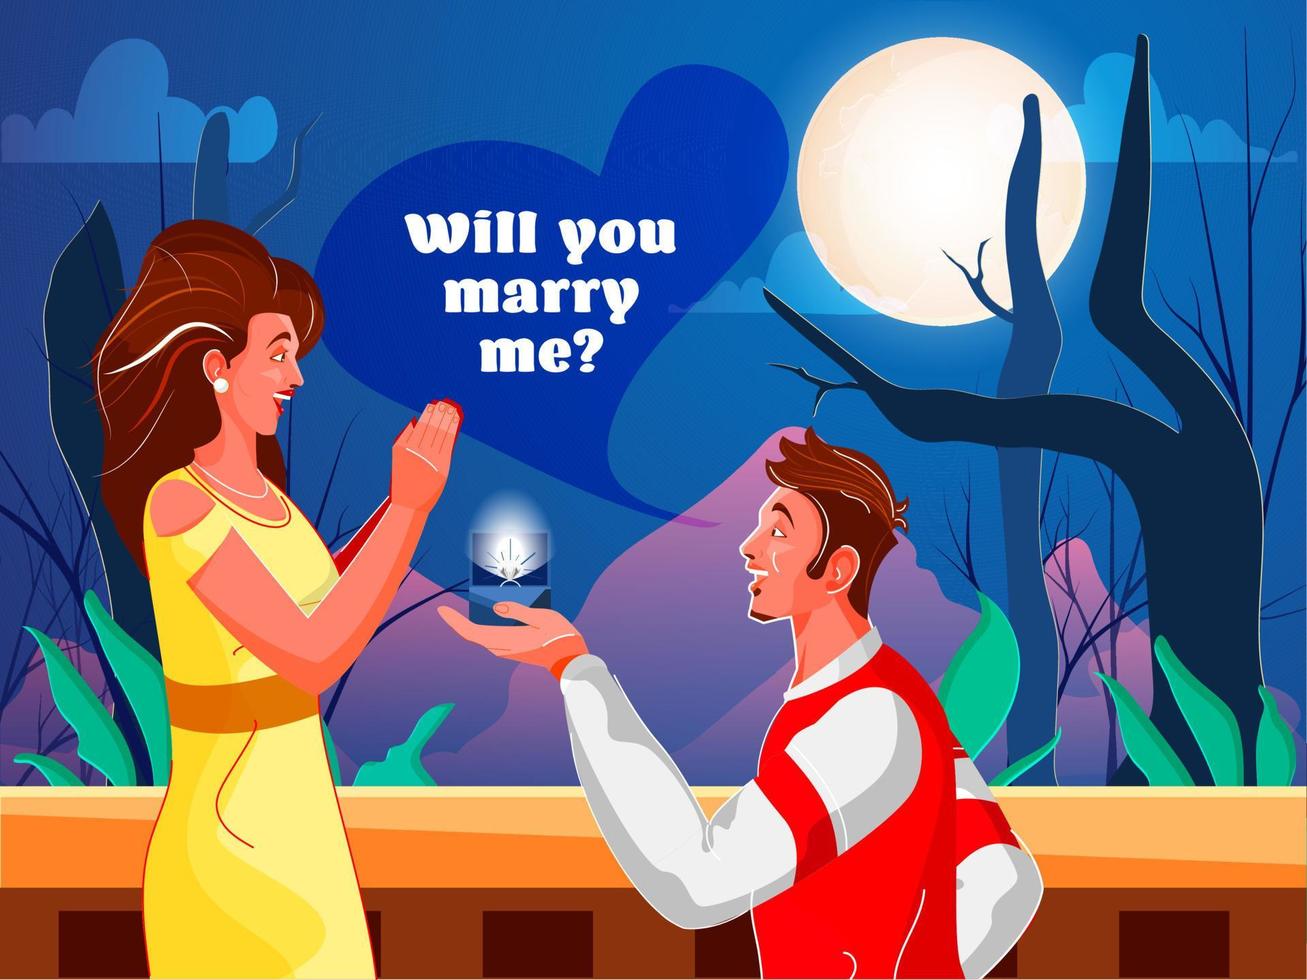 Full Moon Nature Landscape Scene Background with Young Boy Proposing his Girlfriend Saying Will You Marry Me. vector